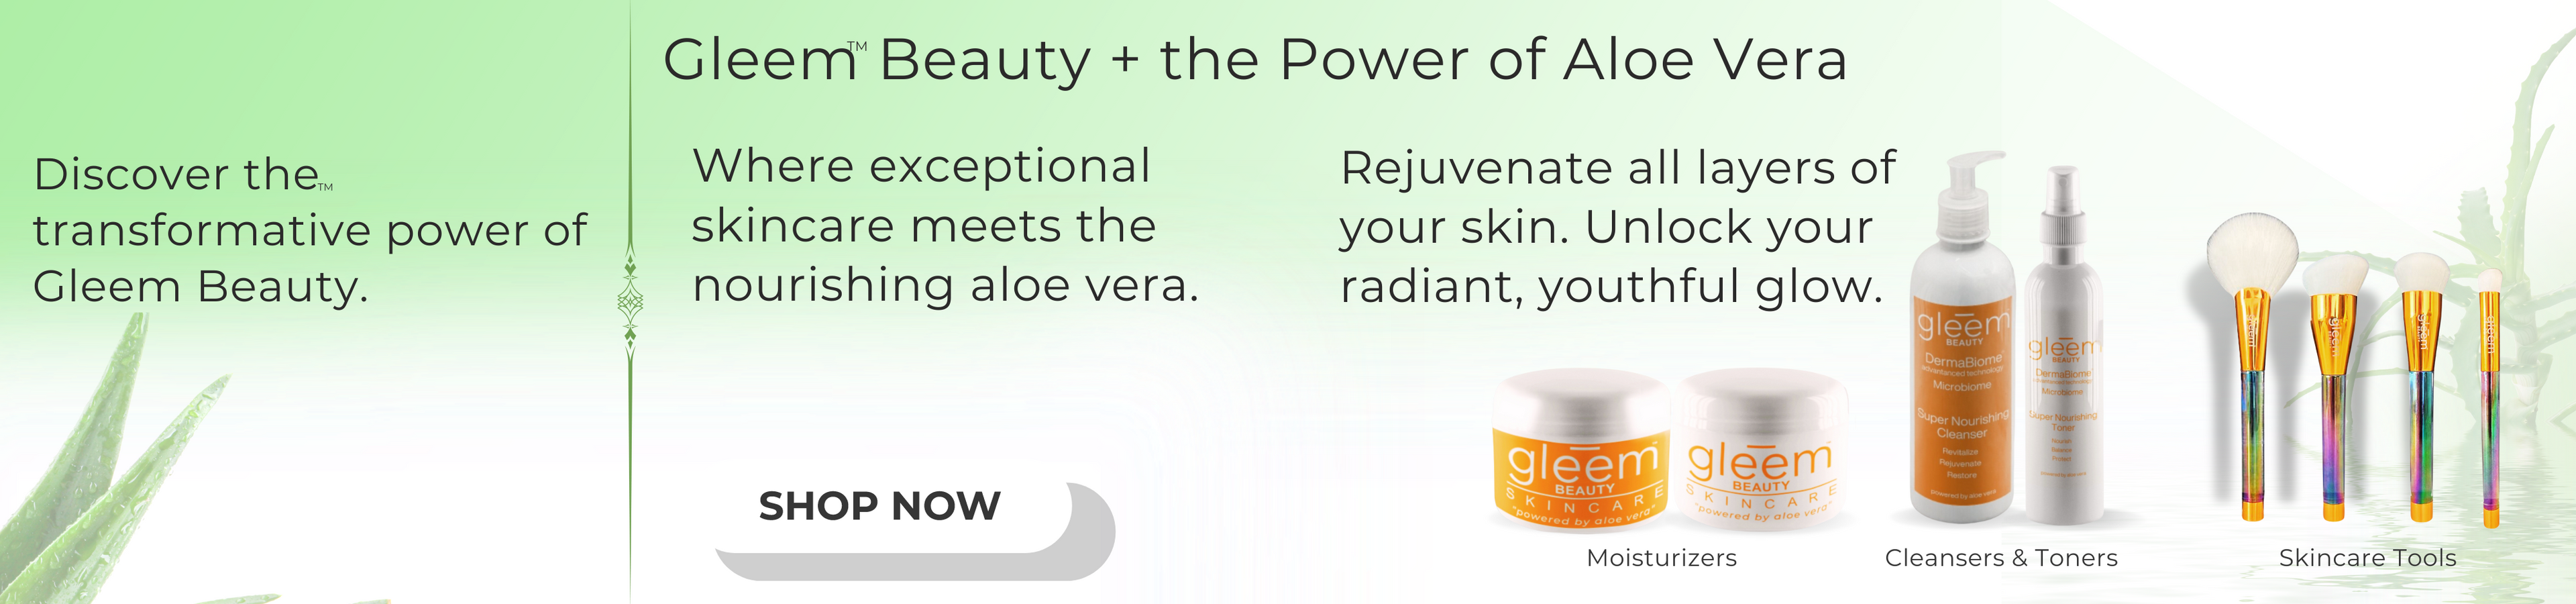 Gleem Beauty products use Organic Aloe Vera, which nourishes and rejuvenates the skin